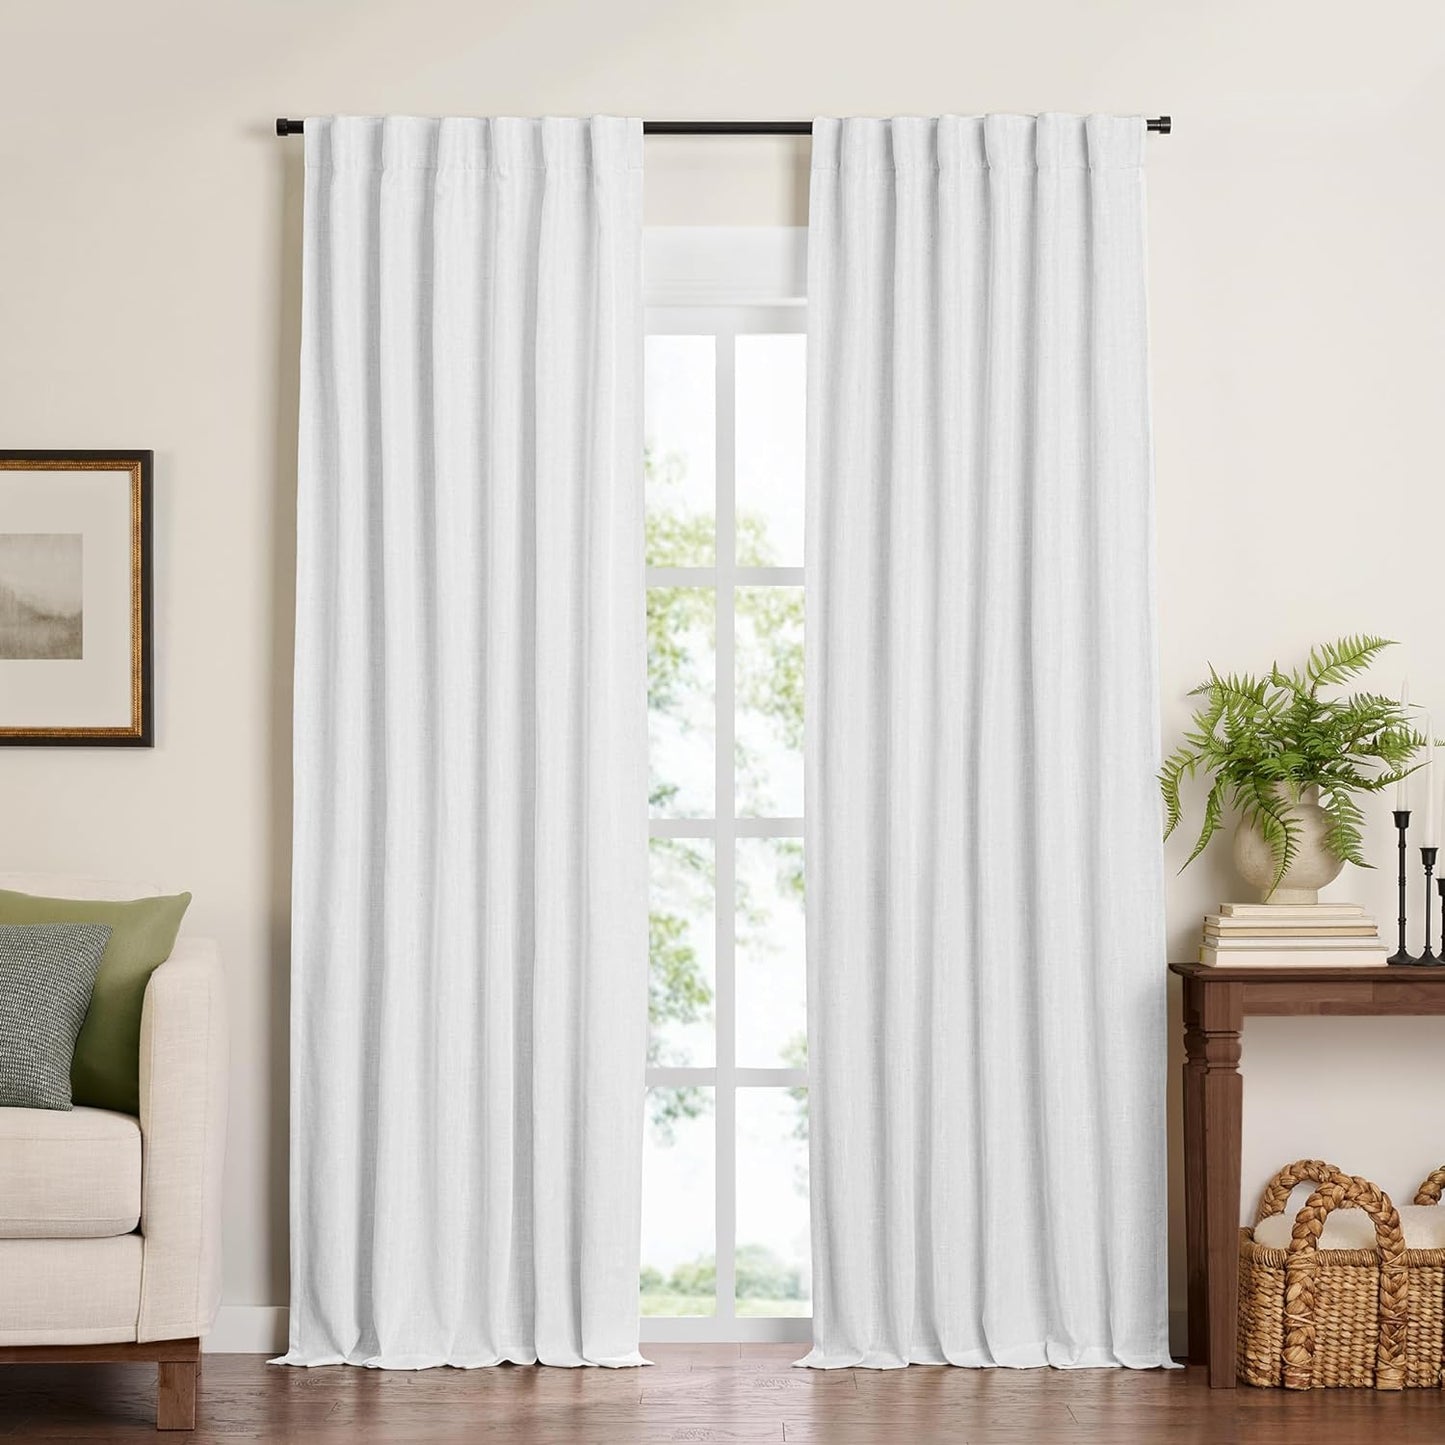 Elrene Home Fashions Harrow Solid Texture Blackout Single Window Curtain Panel, 52"X84", Natural  Elrene Home Fashions White 52"X108" (1 Panel) 